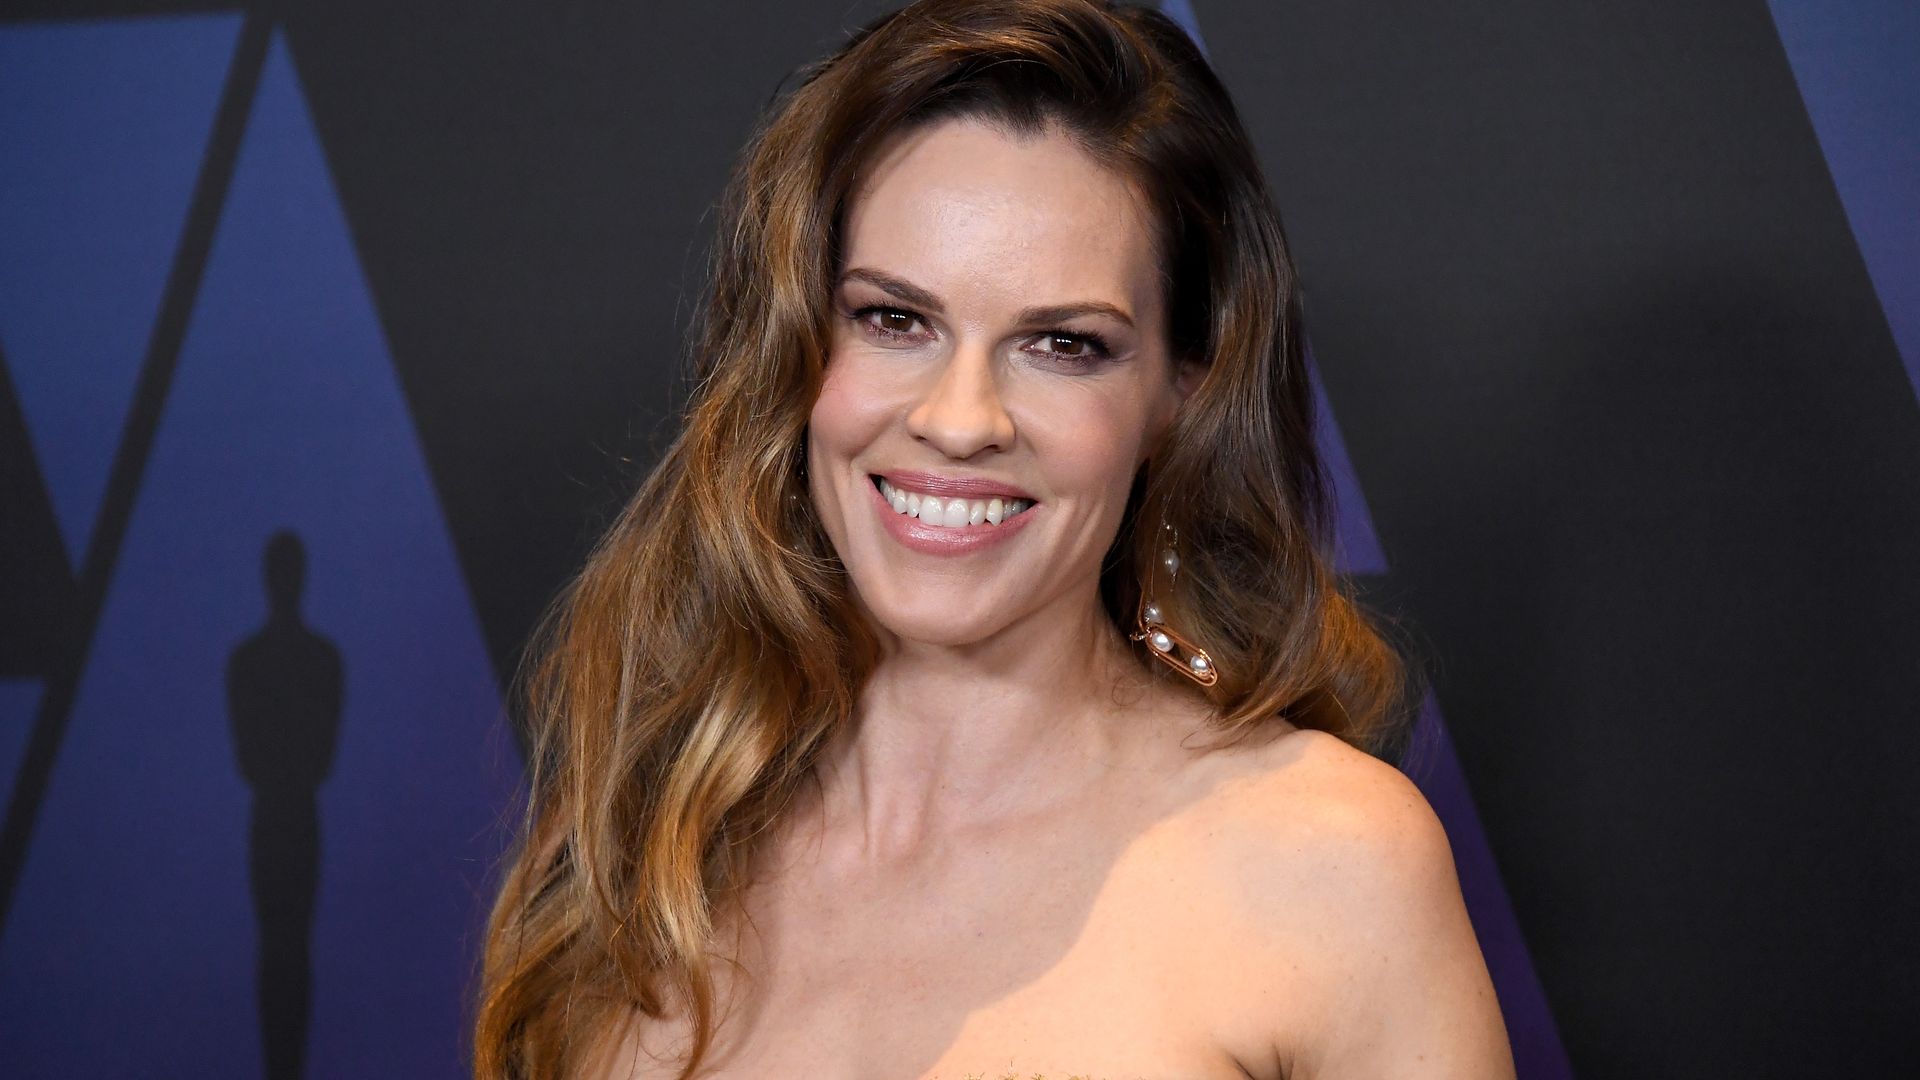 Hilary Swank on the red carpet 